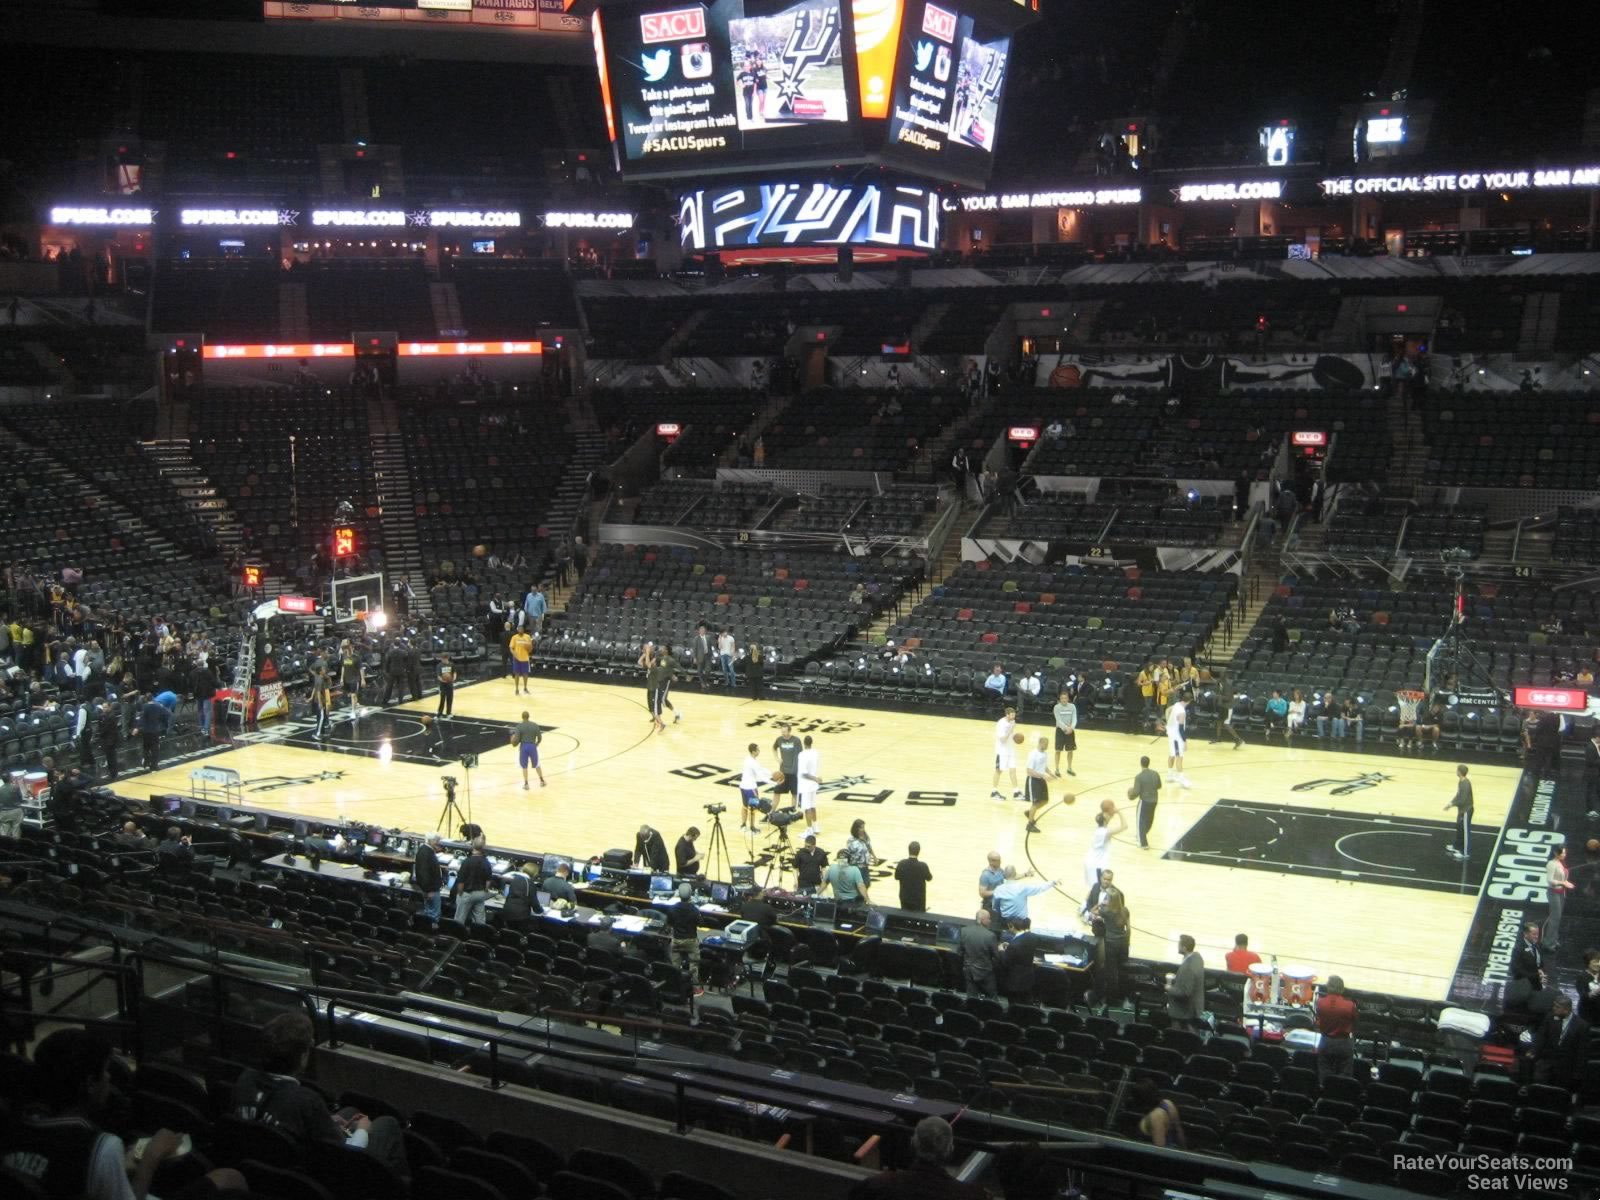 section 106, row 27 seat view  for basketball - at&t center